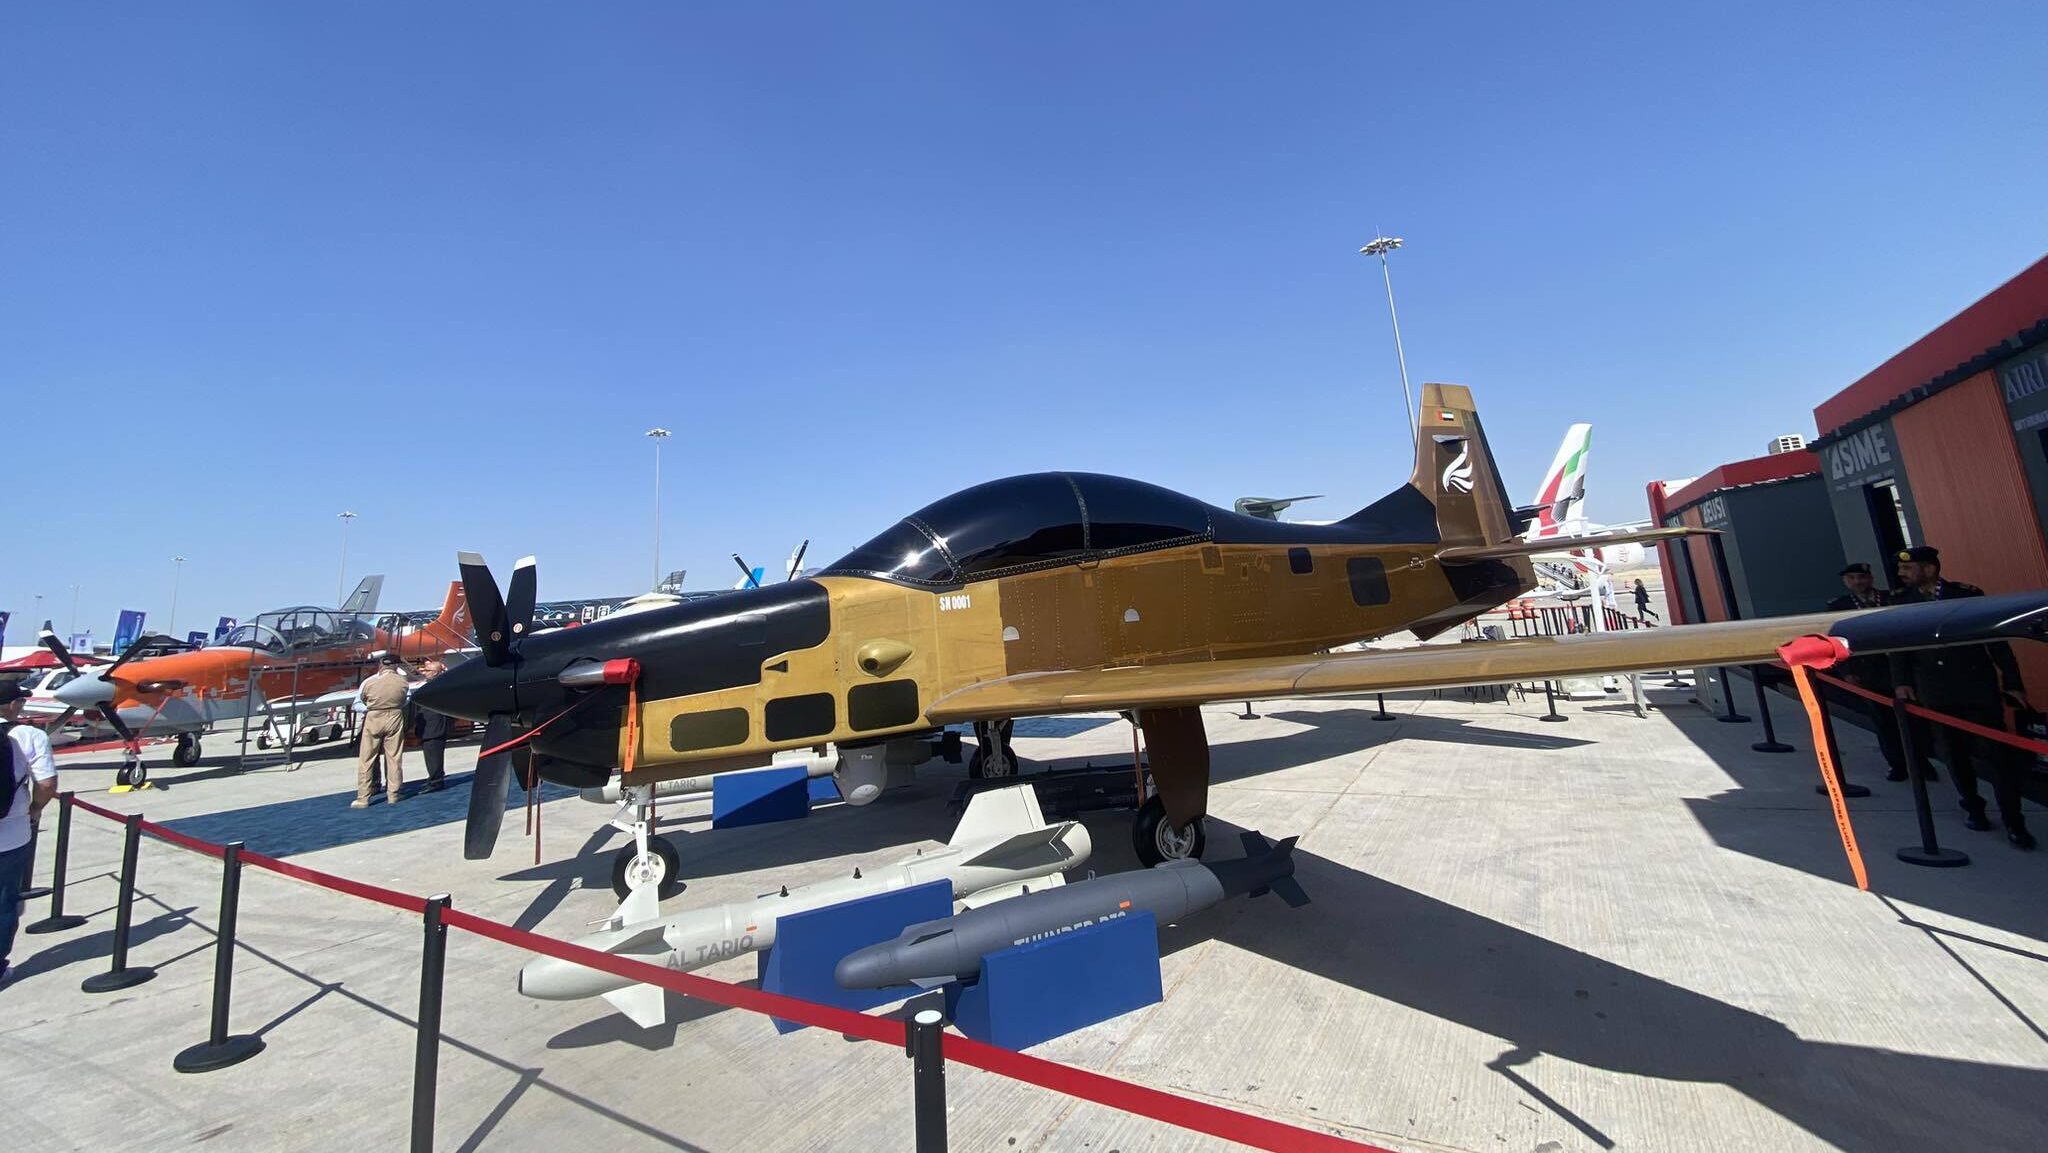 UAE air force makes first order for Emirati firm Calidus’s B250 trainer aircraft: CEO